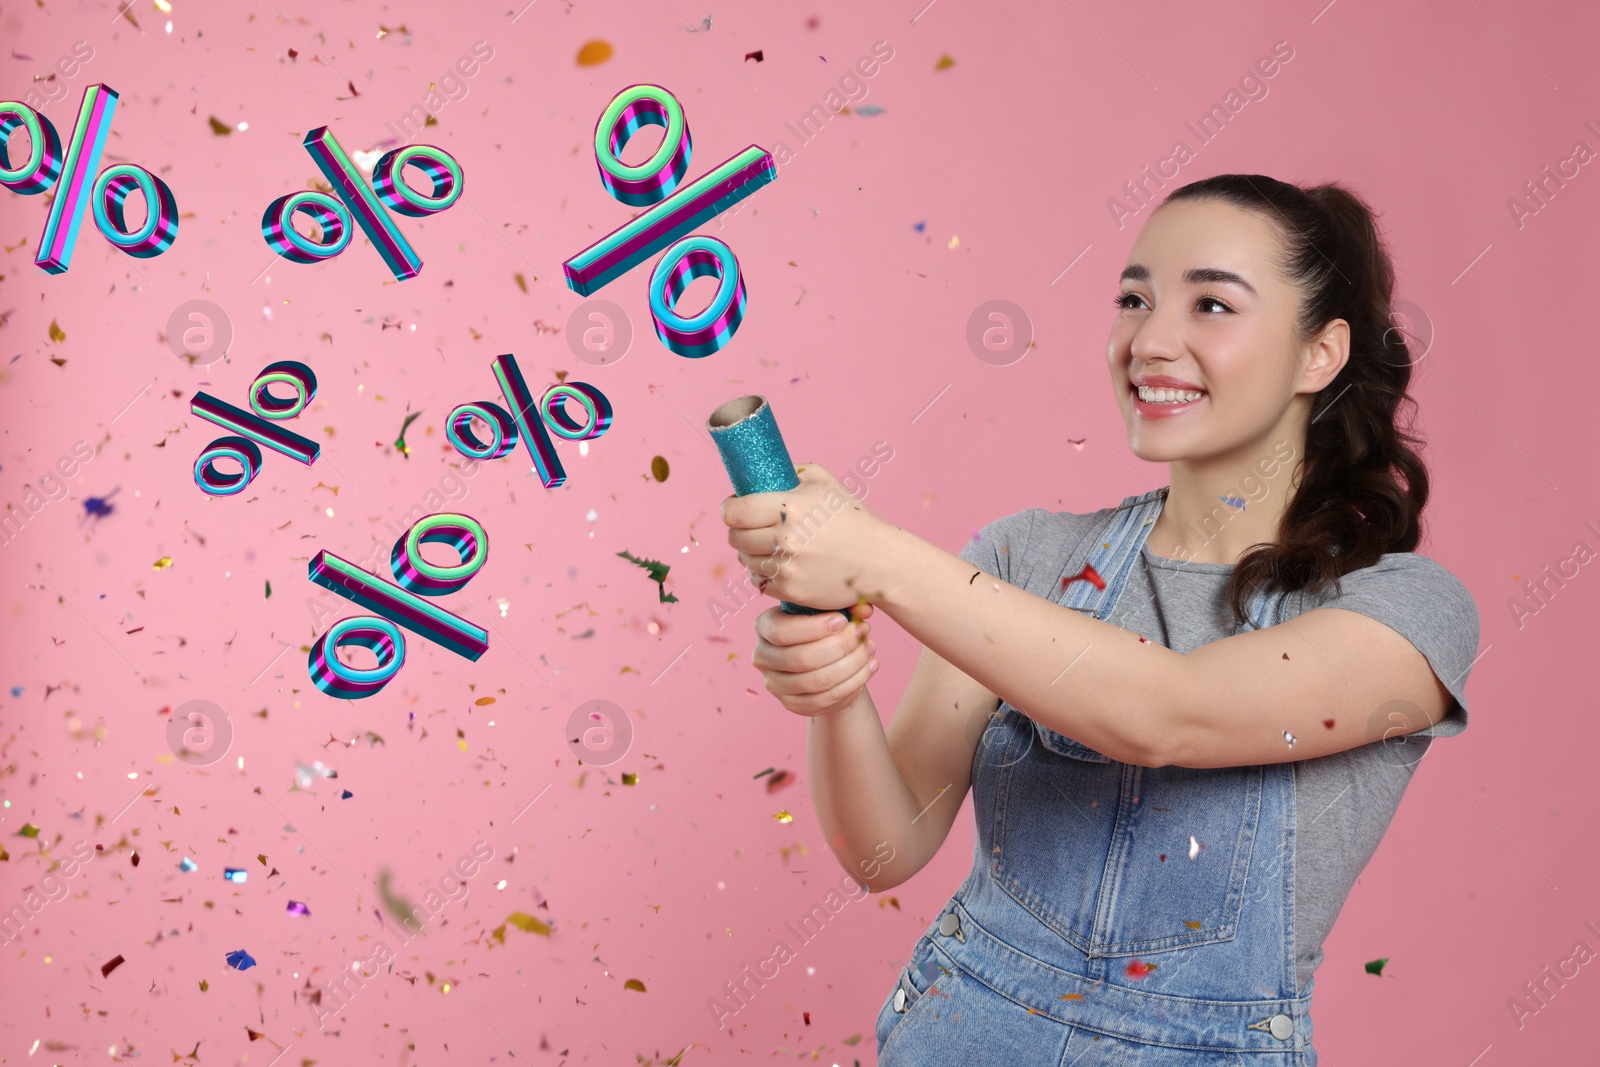 Image of Discount offer. Happy young woman blowing up party popper on pink background. Confetti and percent signs in air